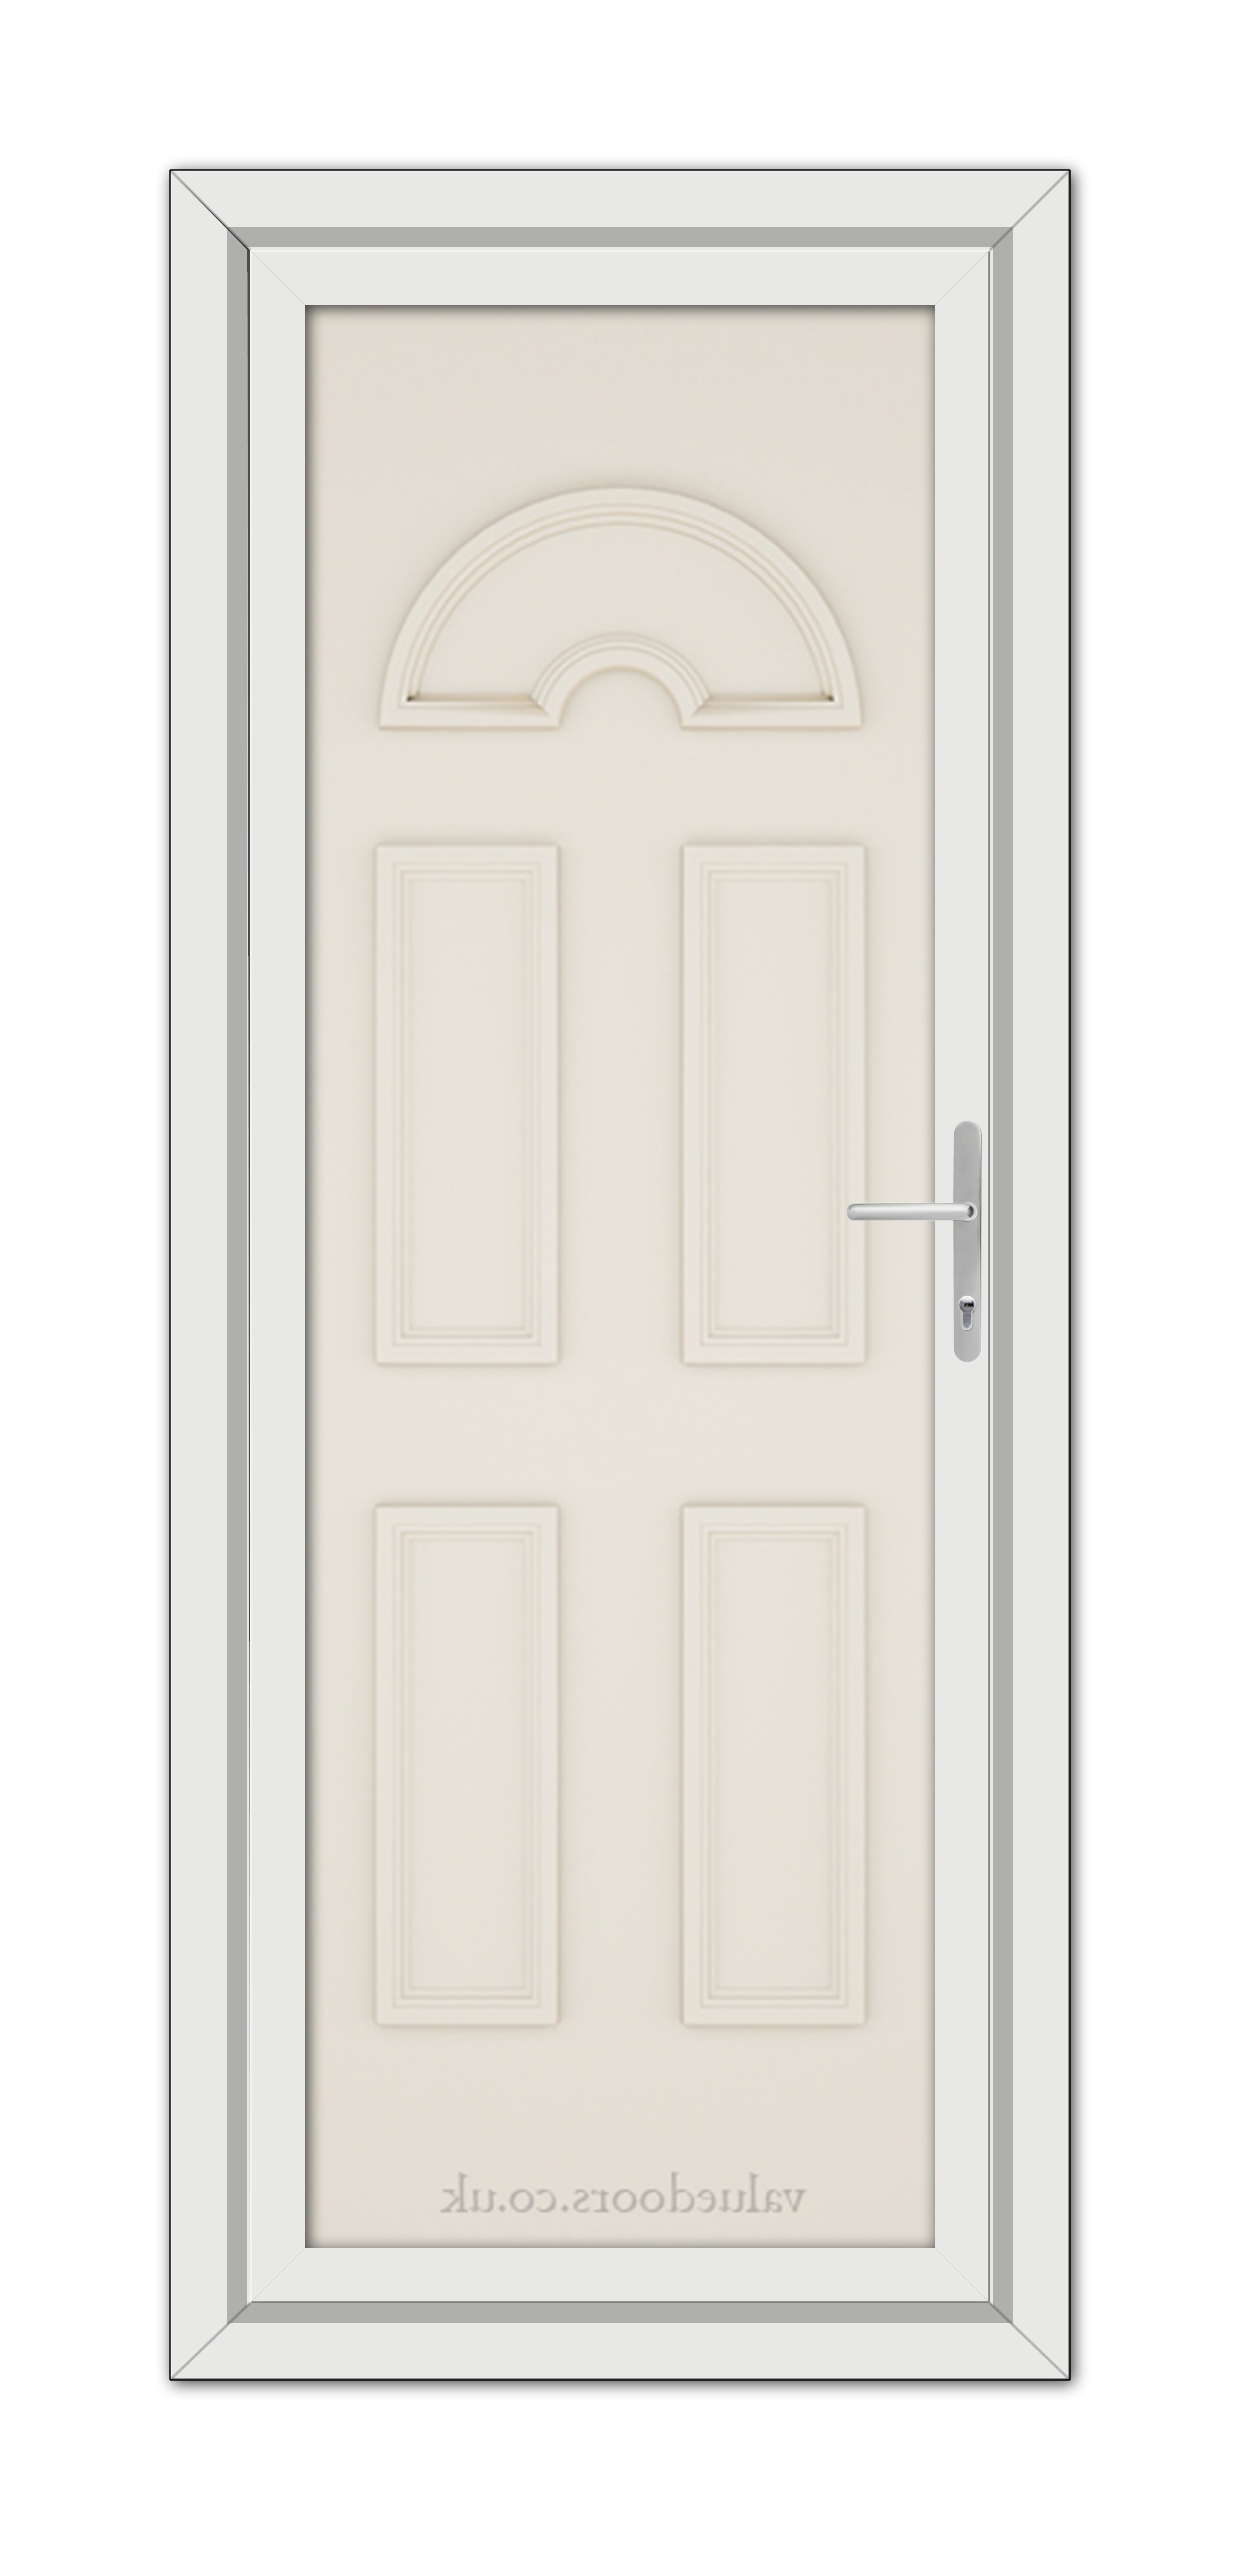 Cream Sandringham Solid uPVC Door with an arched top window and a metal handle, set in a grey frame.